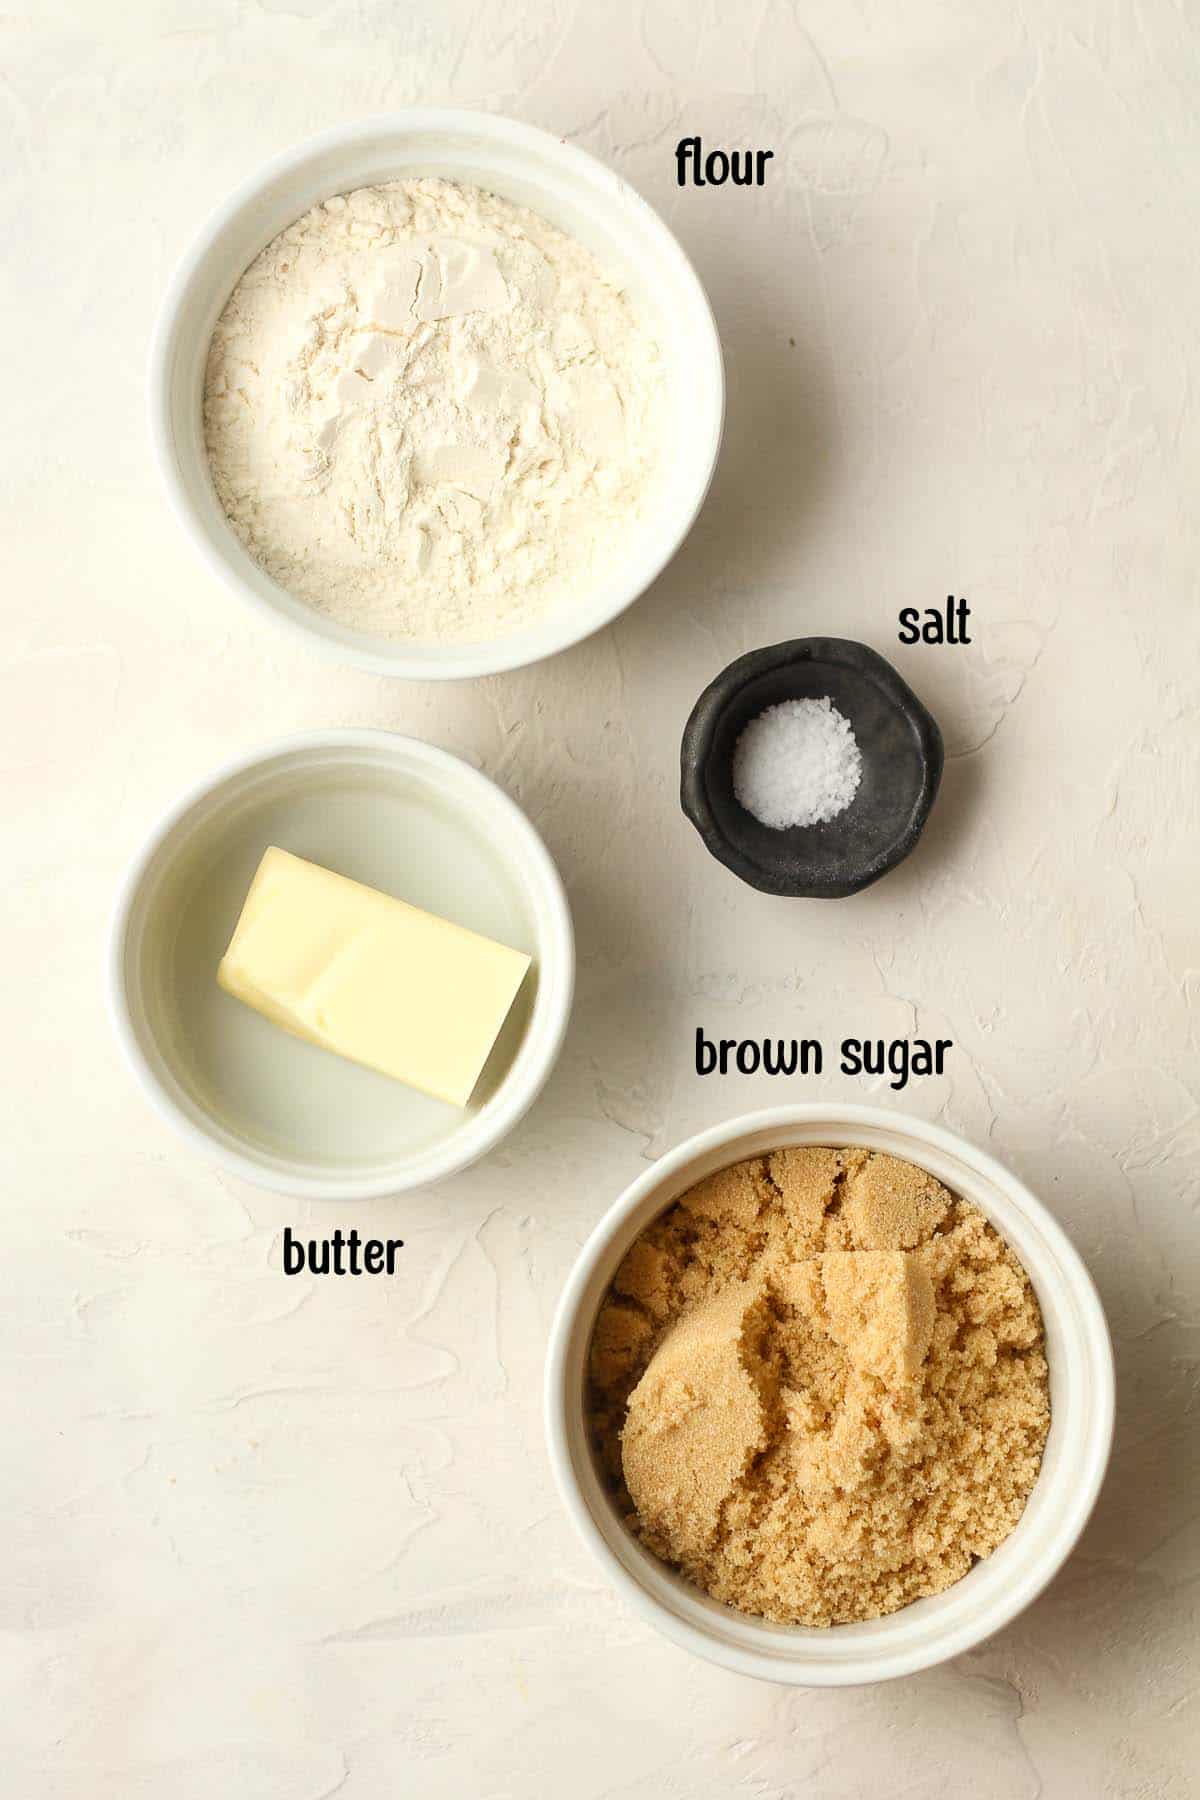 The labeled ingredients for the crumb topping.